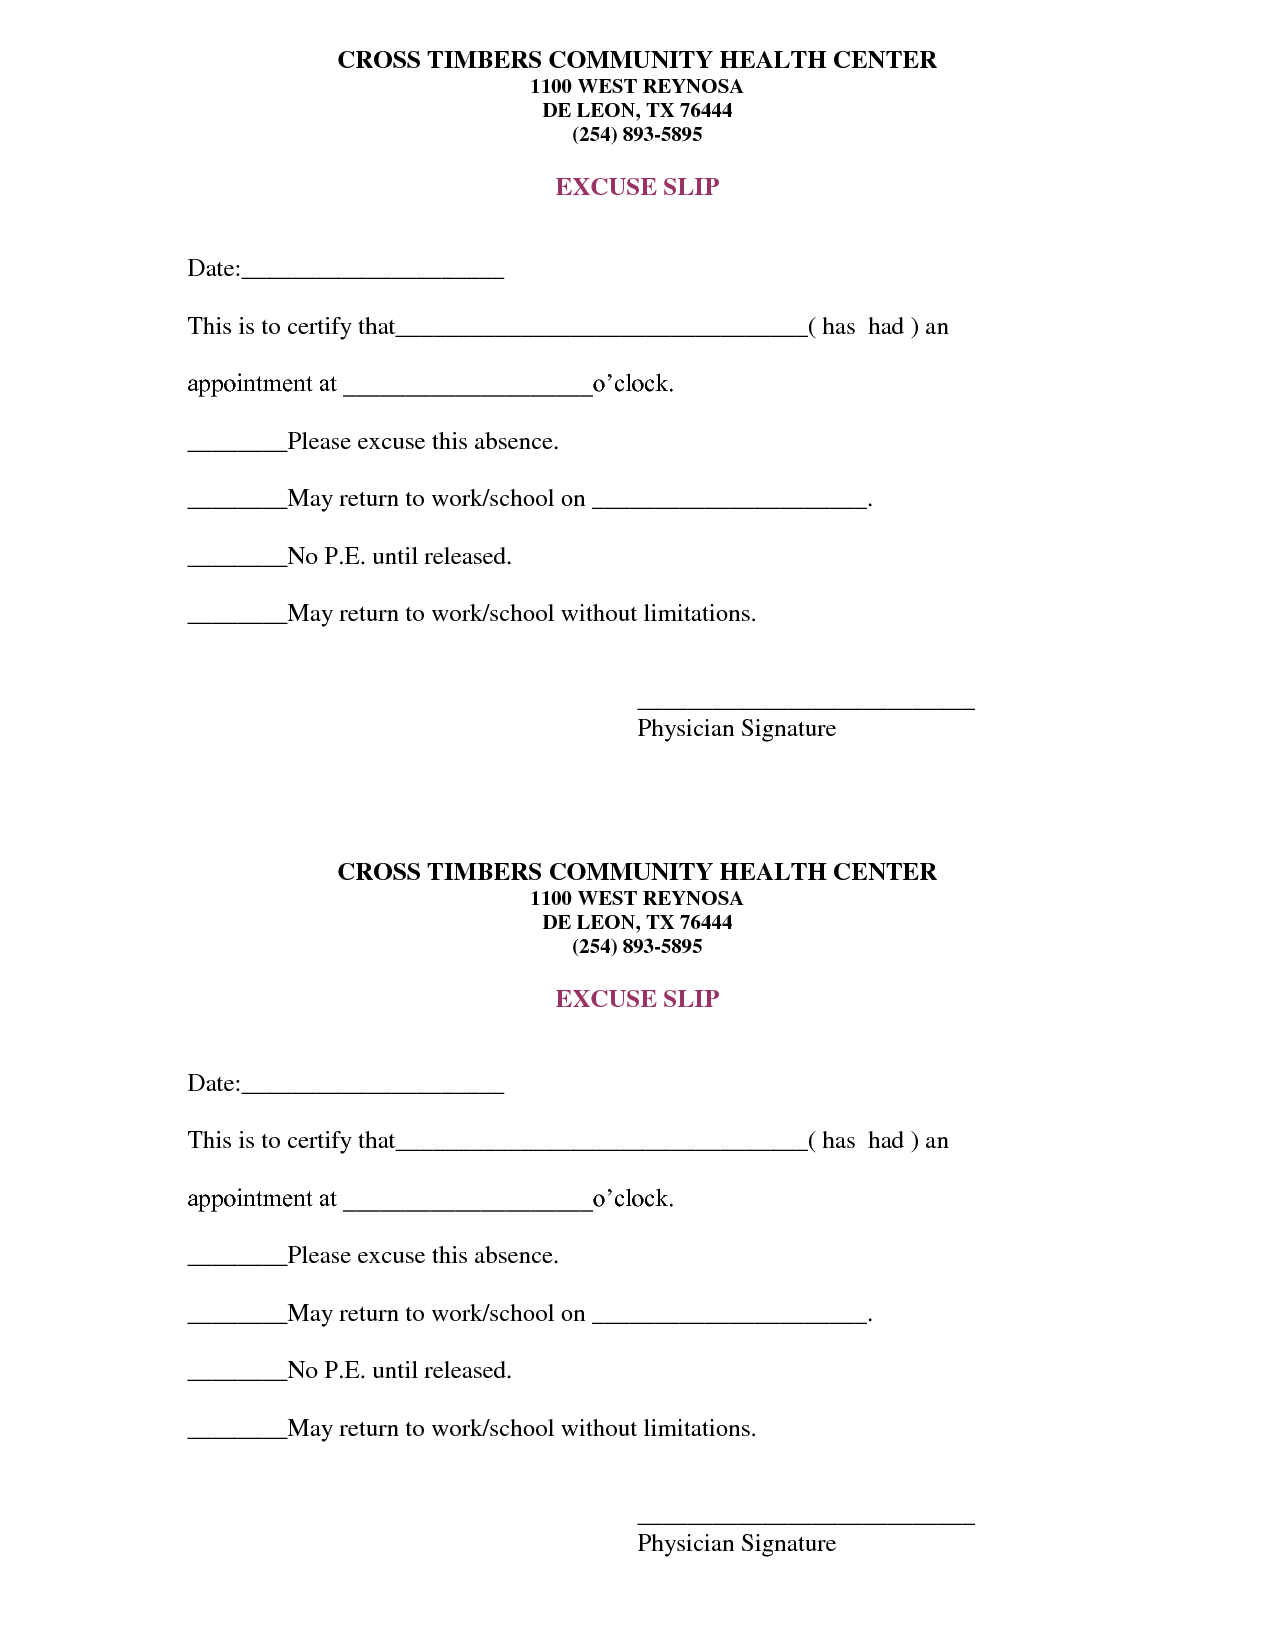 Free Doctors Note Template | Scope Of Work Template | On The Run - Doctor Notes For Free Printable